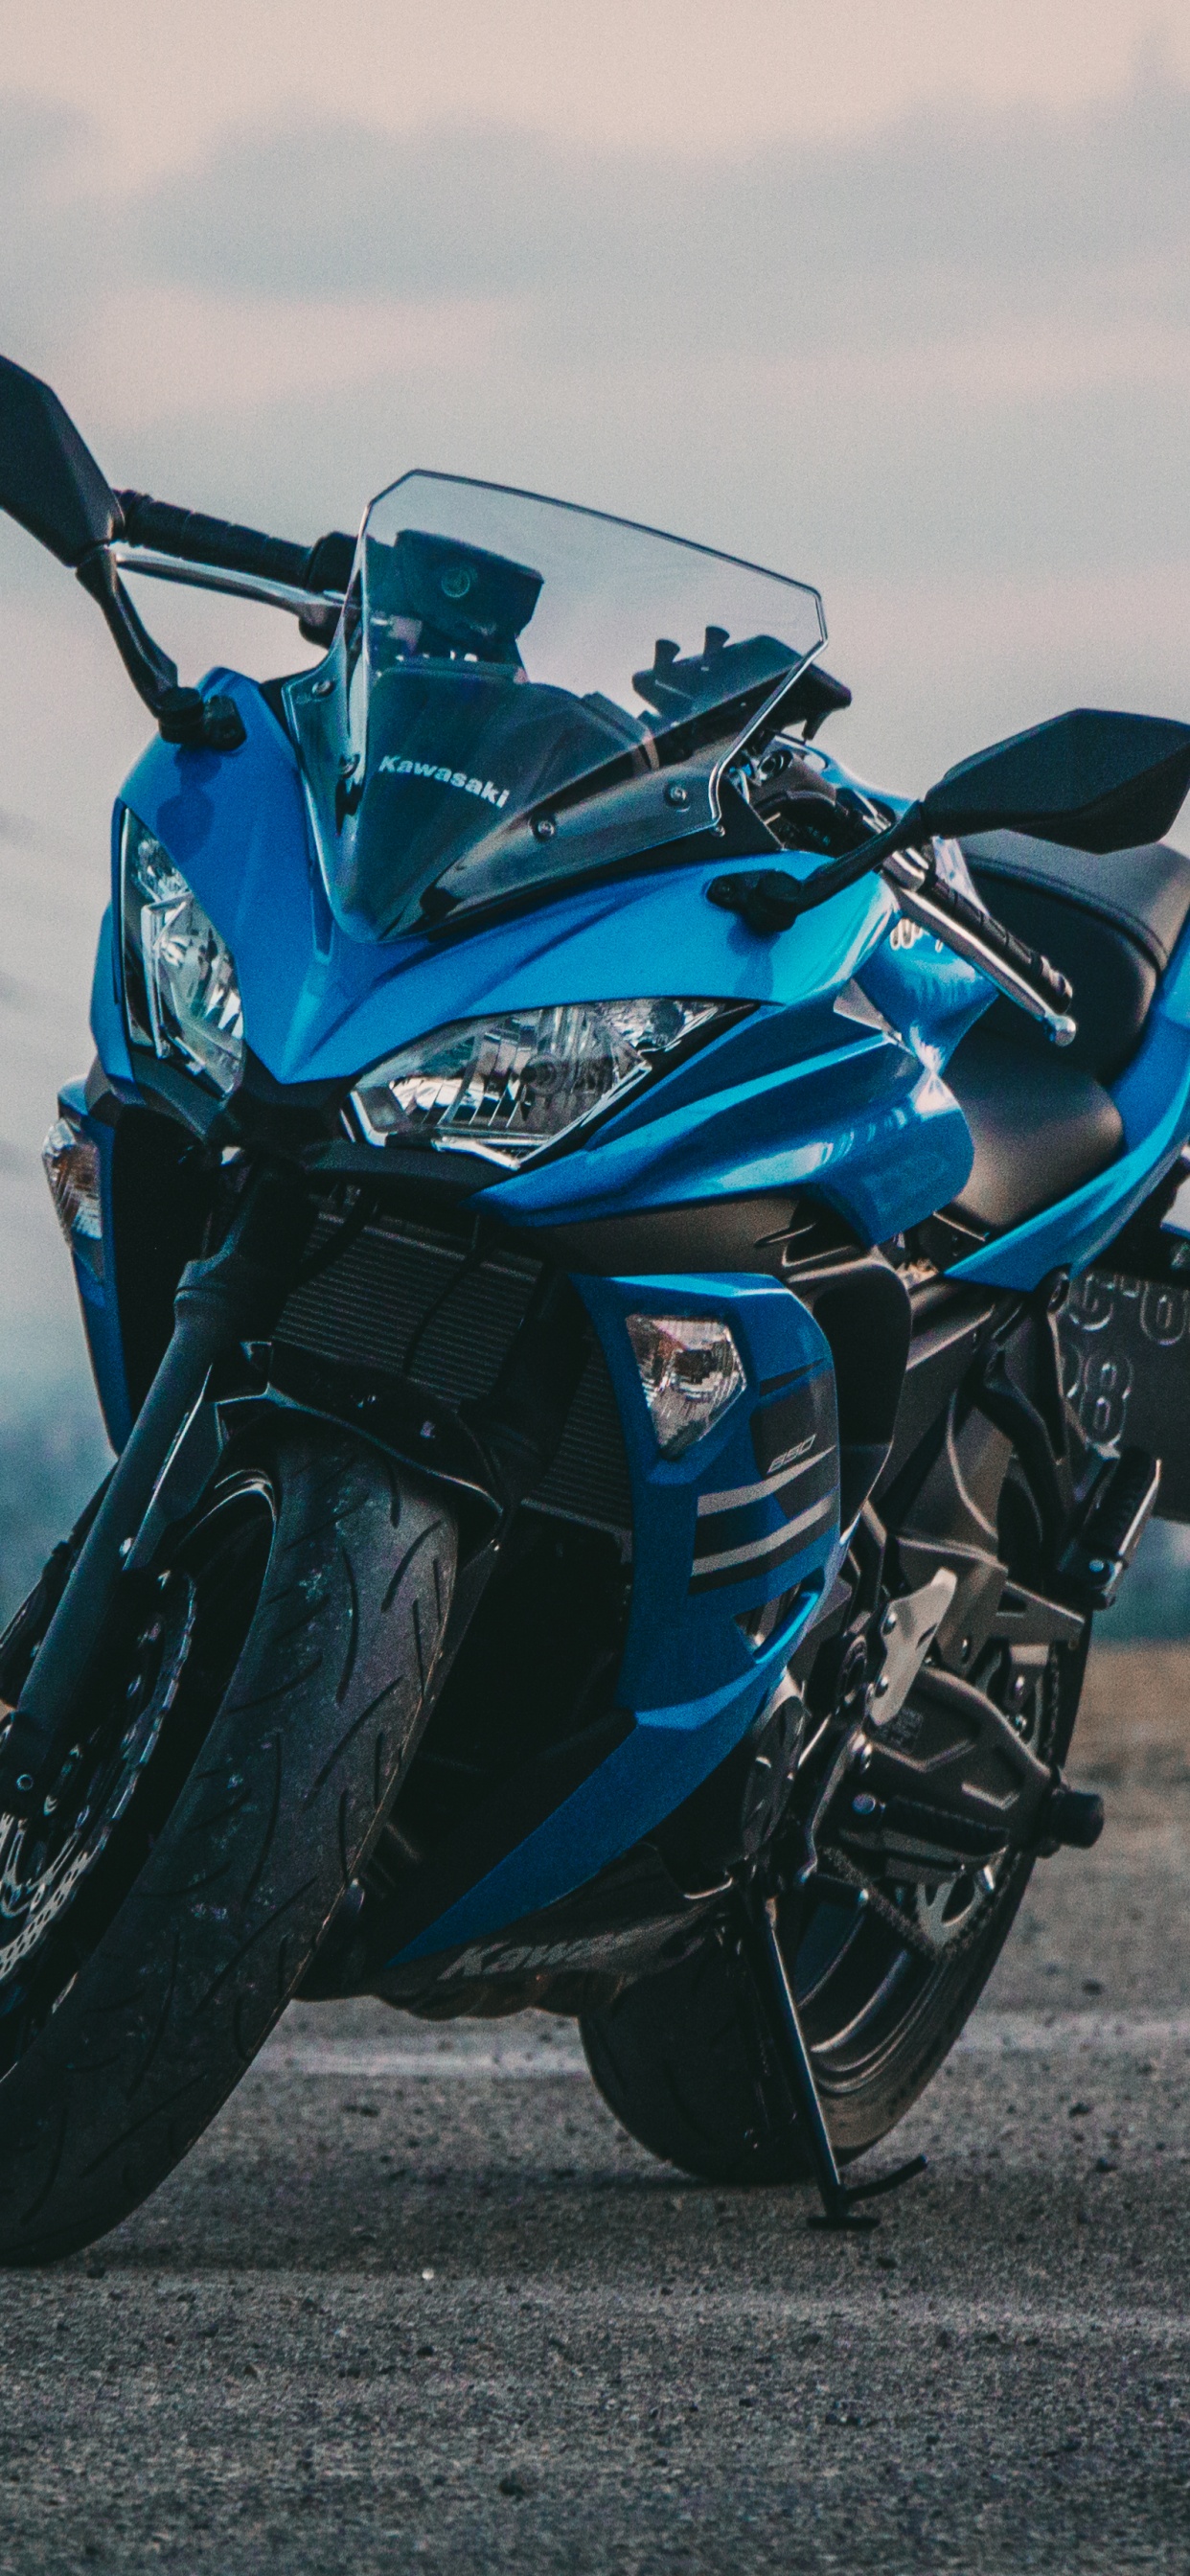 Blue and Black Sports Bike on Gray Asphalt Road During Daytime. Wallpaper in 1242x2688 Resolution